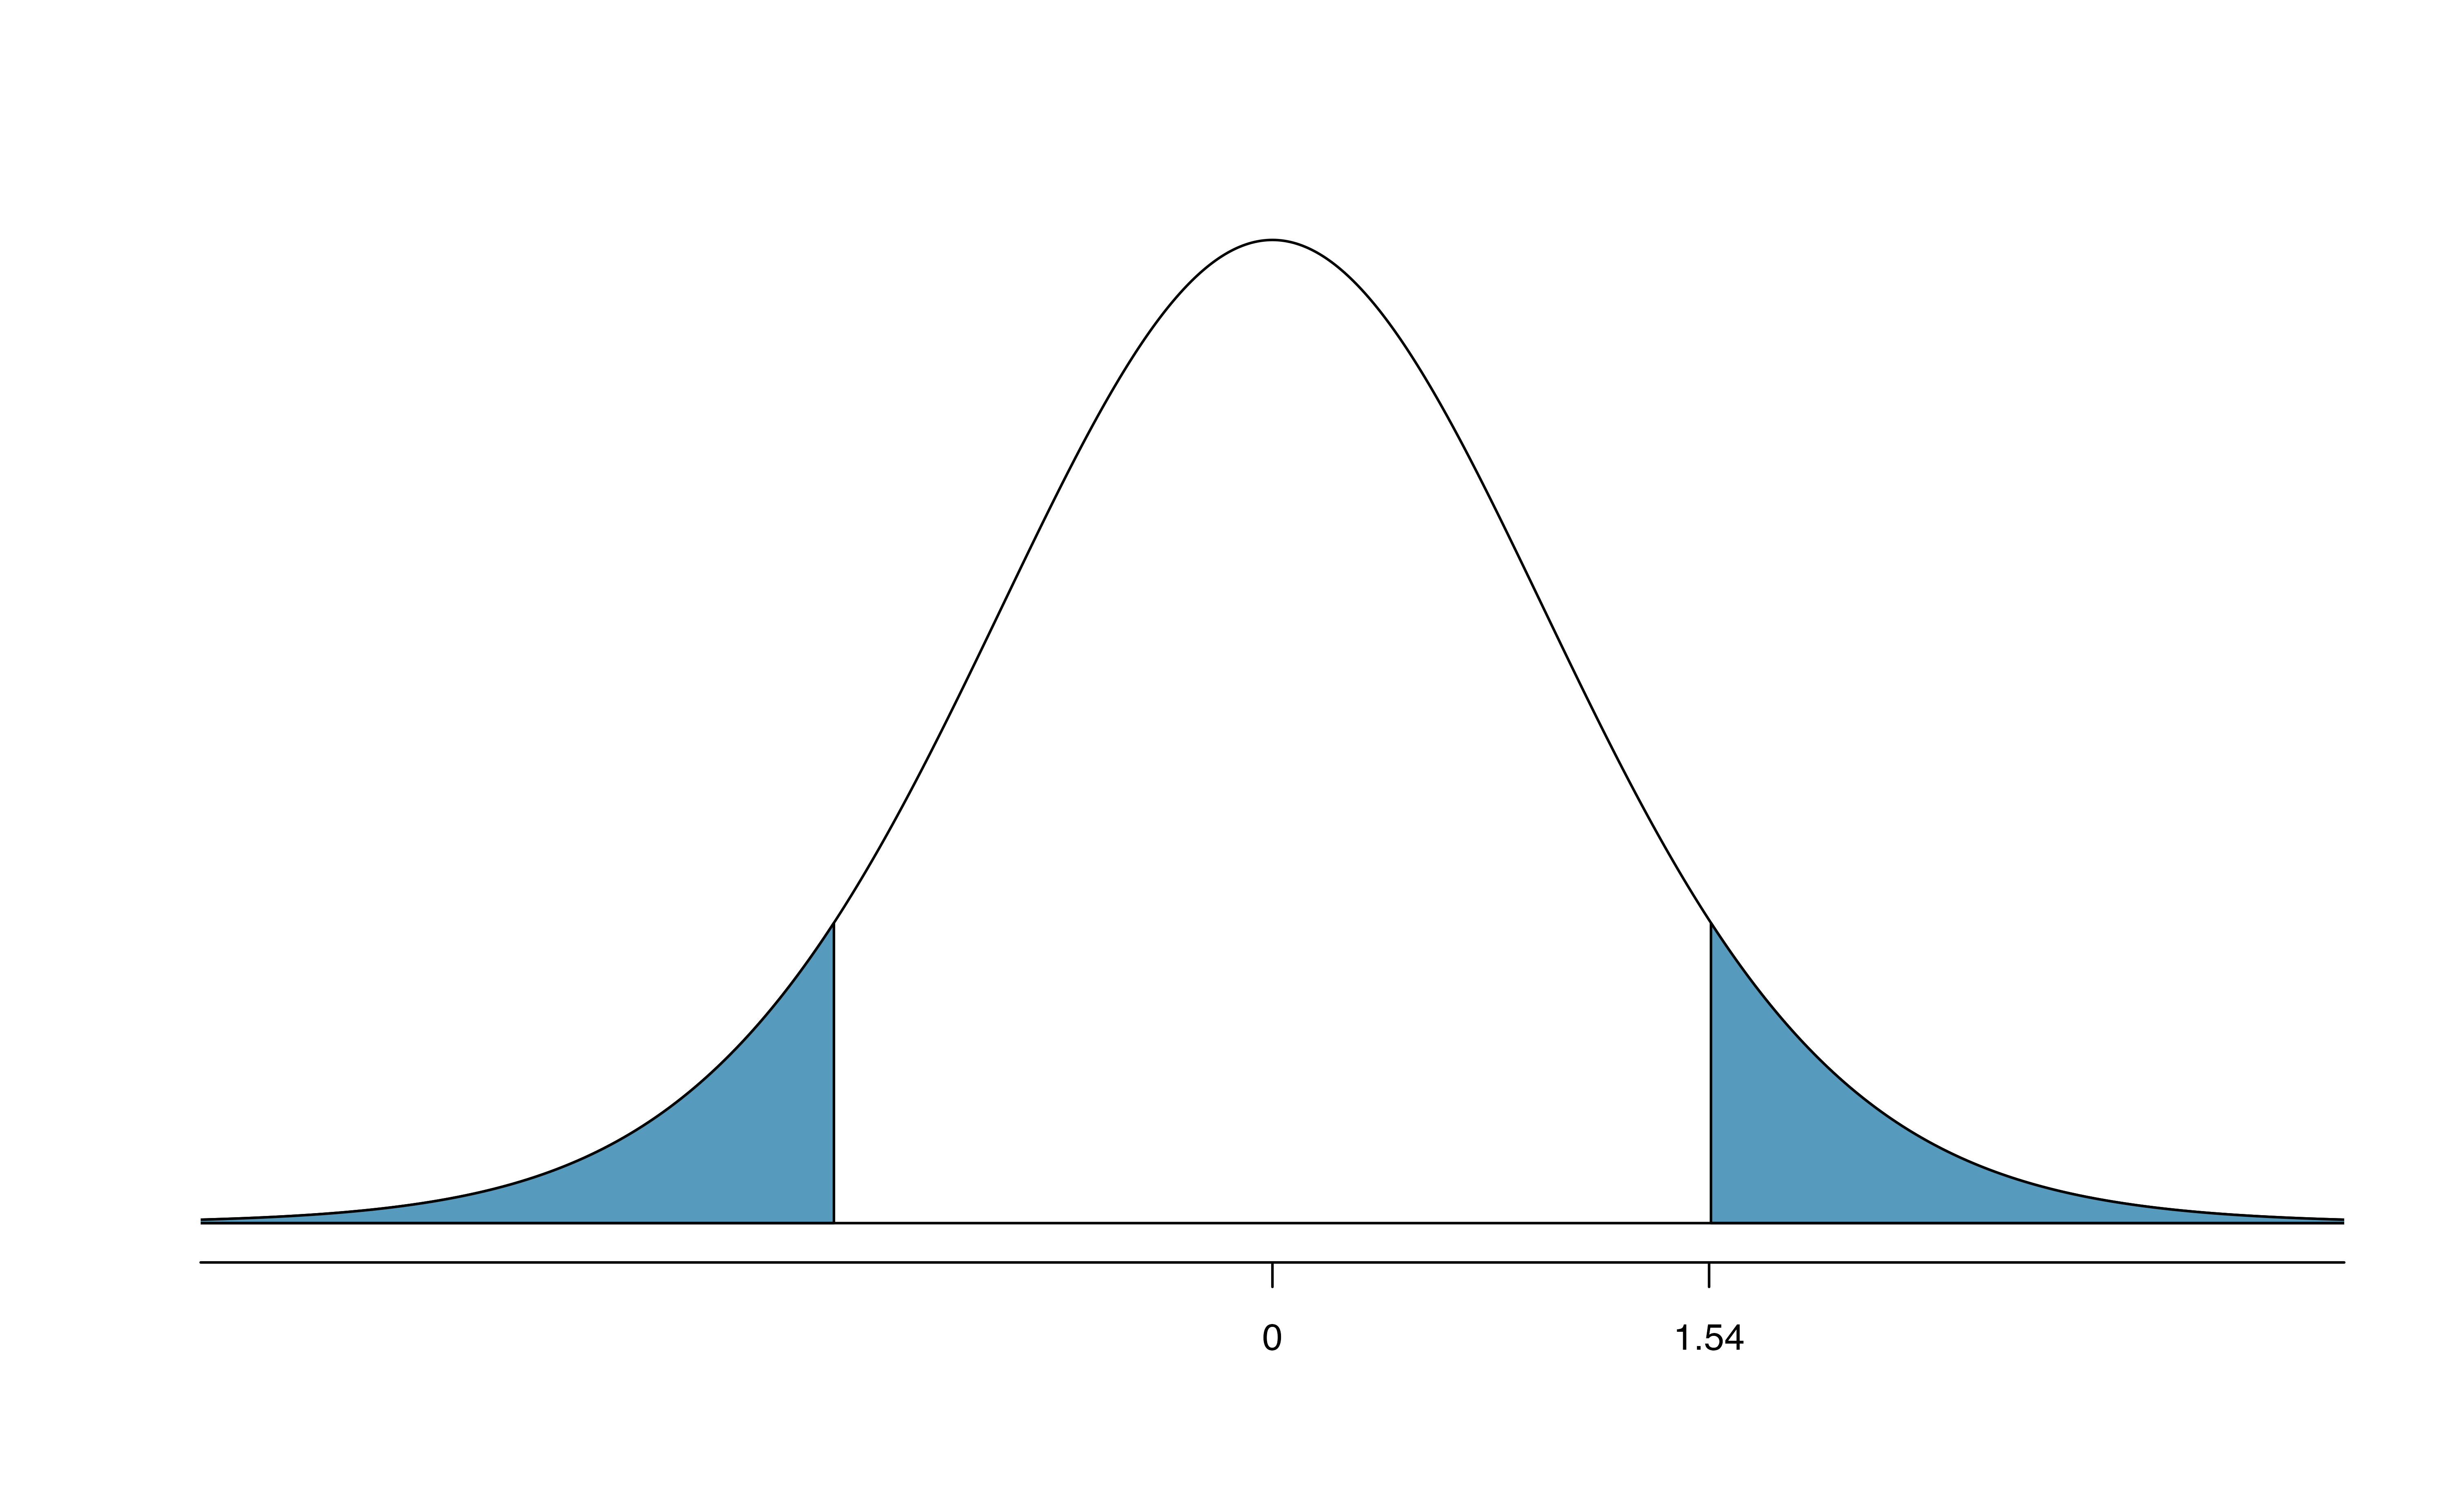 The mathematical model for the T statistic when the null hypothesis is true: a $t$-distribution with $min(100-1, 50-1) = 49$ degrees of freedom.  As expected, the curve is centered at zero (the null value).  The T score is also plotted with the area more extreme than the observed T score plotted to indicate the p-value.